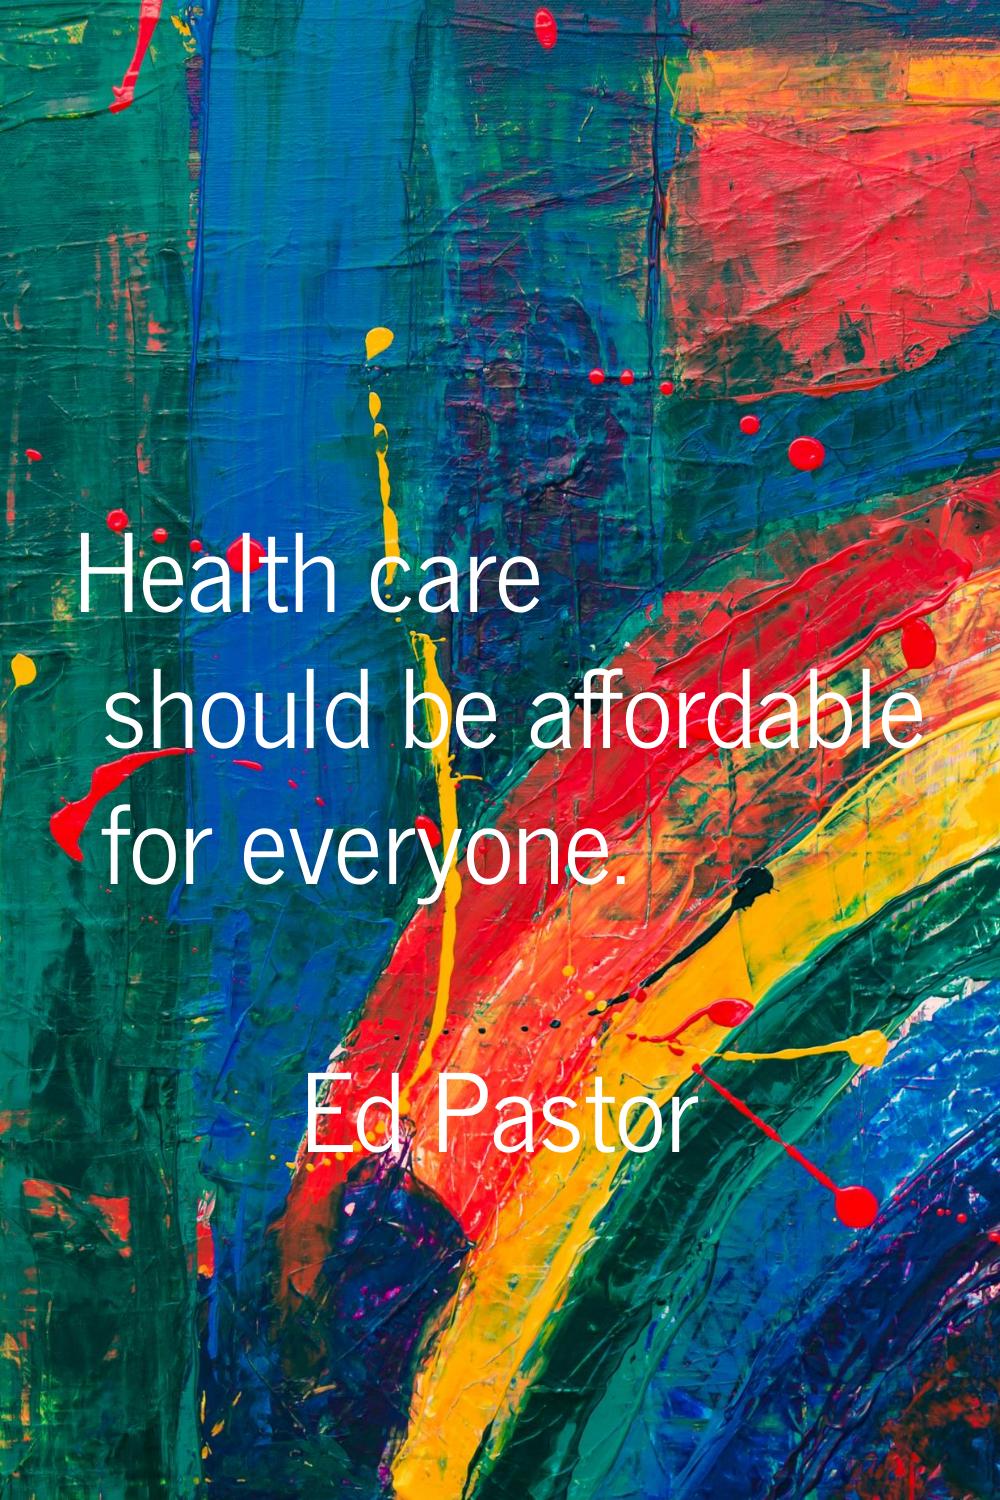 Health care should be affordable for everyone.